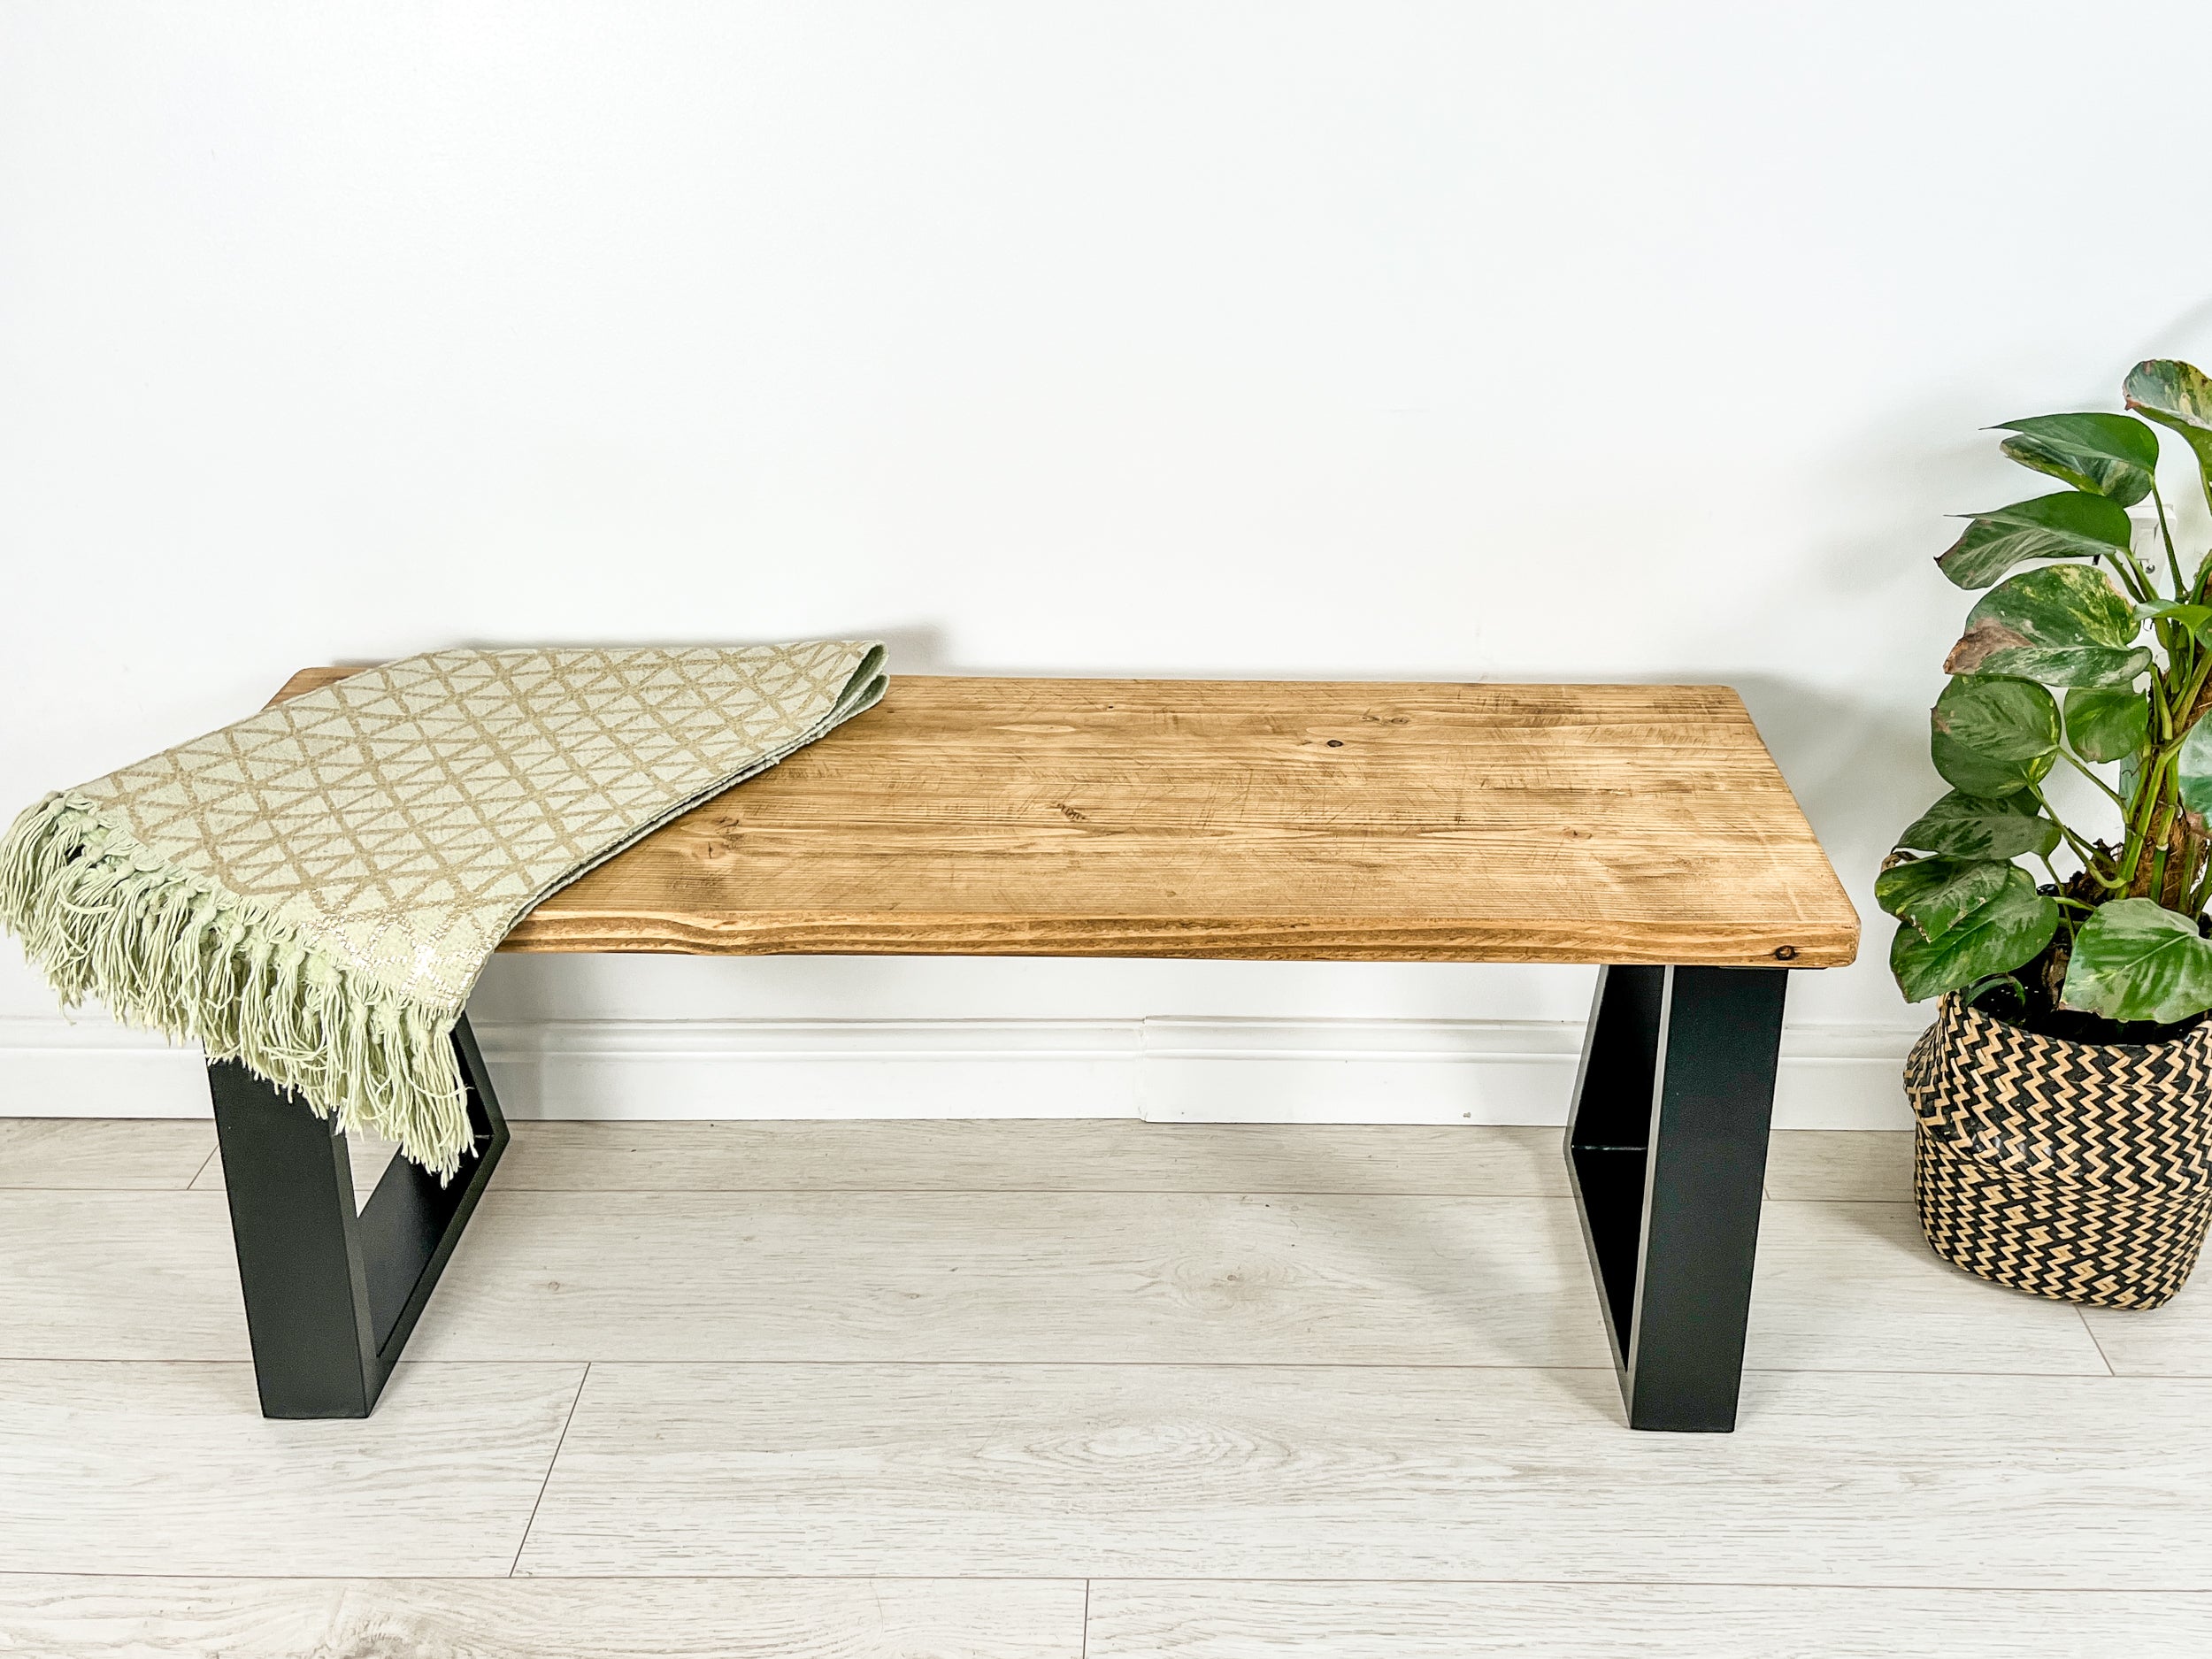 Rustic Wood Bench with Trapezium Steel Frame Legs